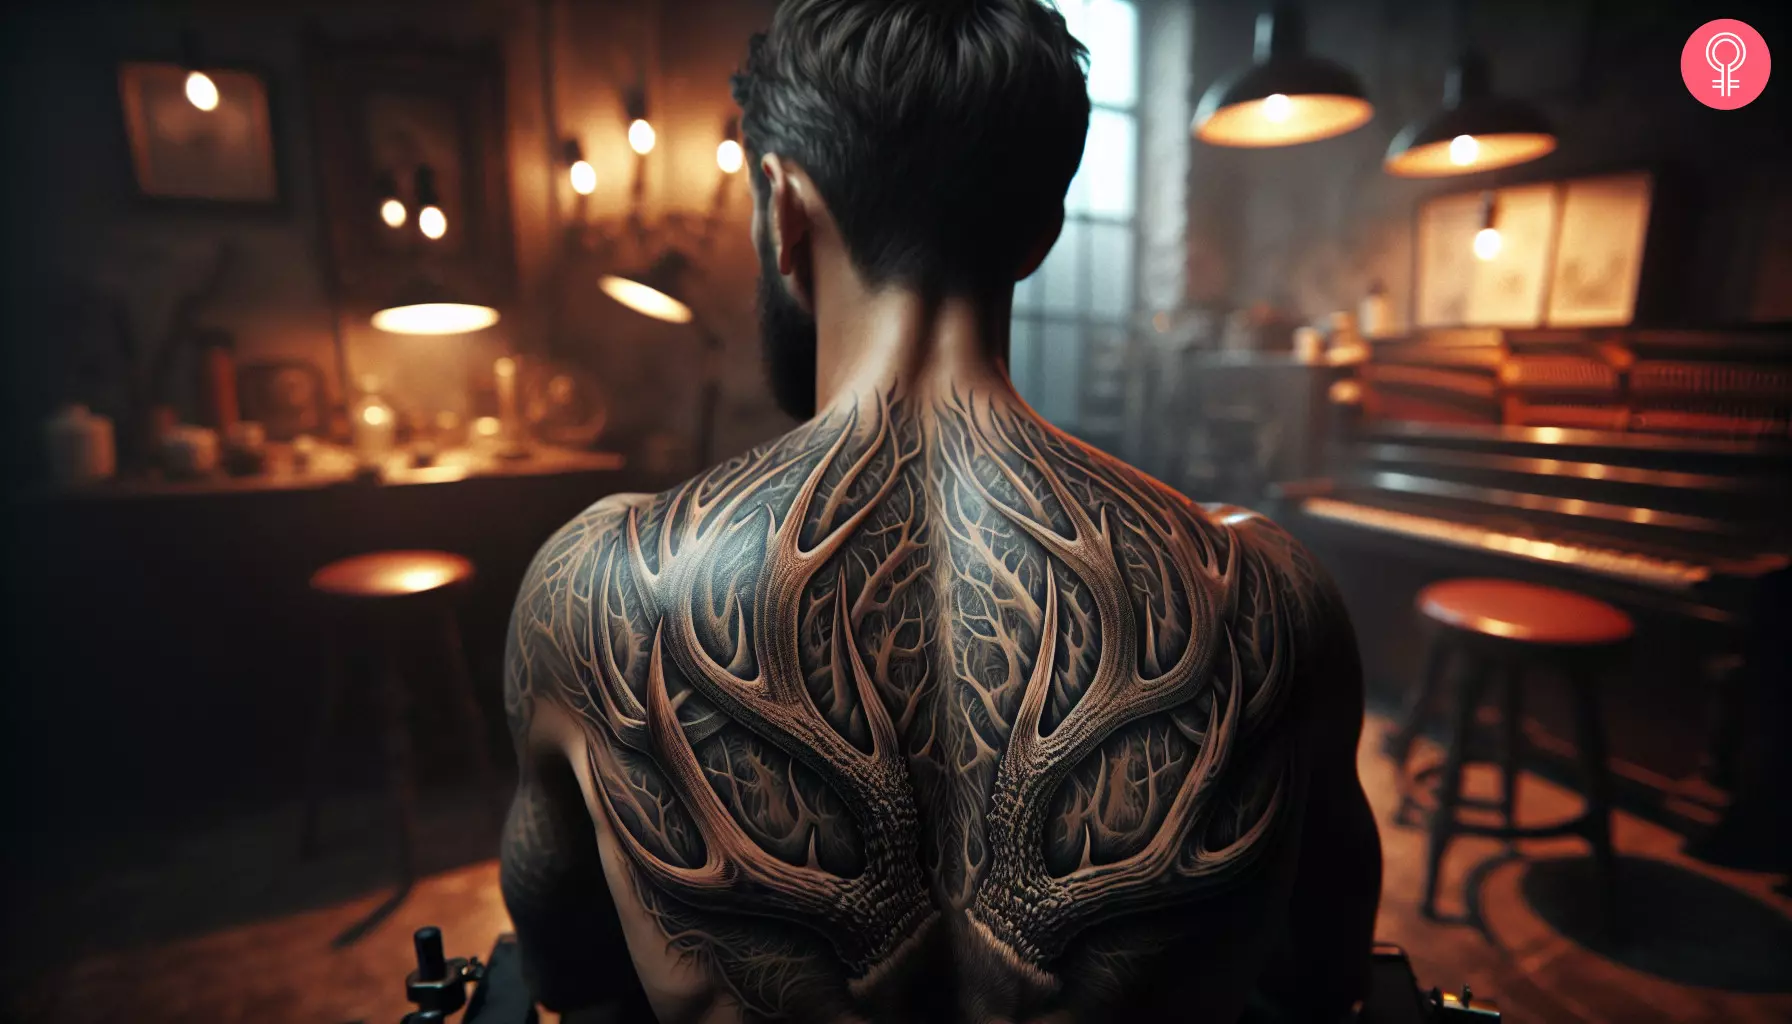 Realistic tattoo of deer antlers on a man’s back